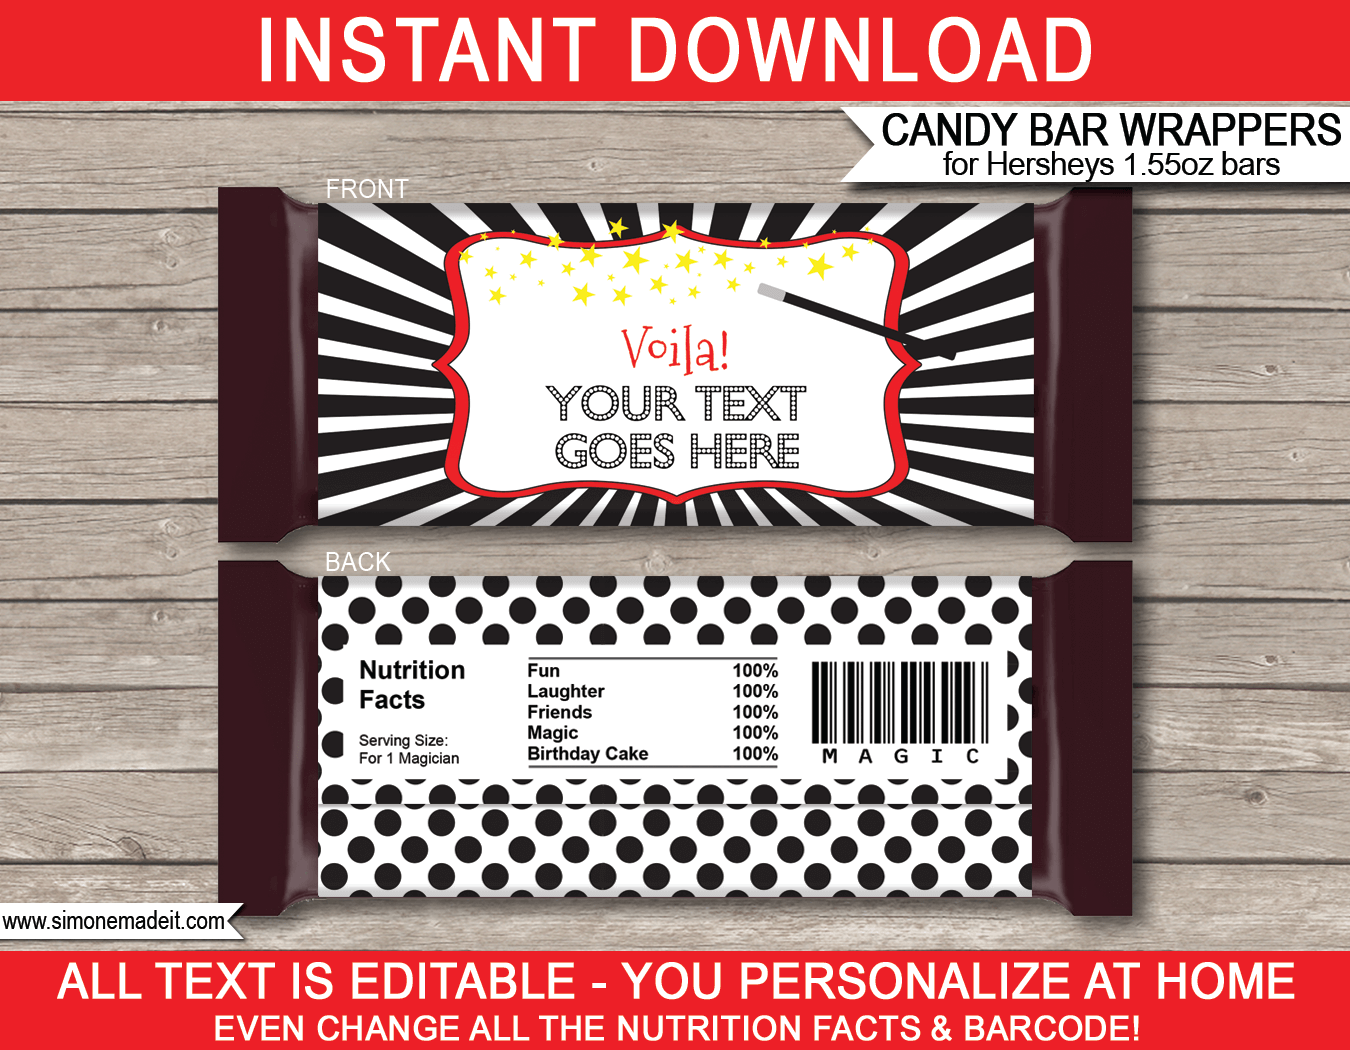 Magic Hershey Candy Bar Wrappers | Birthday Party Favors | Personalized Candy Bars | Editable Template | INSTANT DOWNLOAD $3.00 via simonemadeit.com